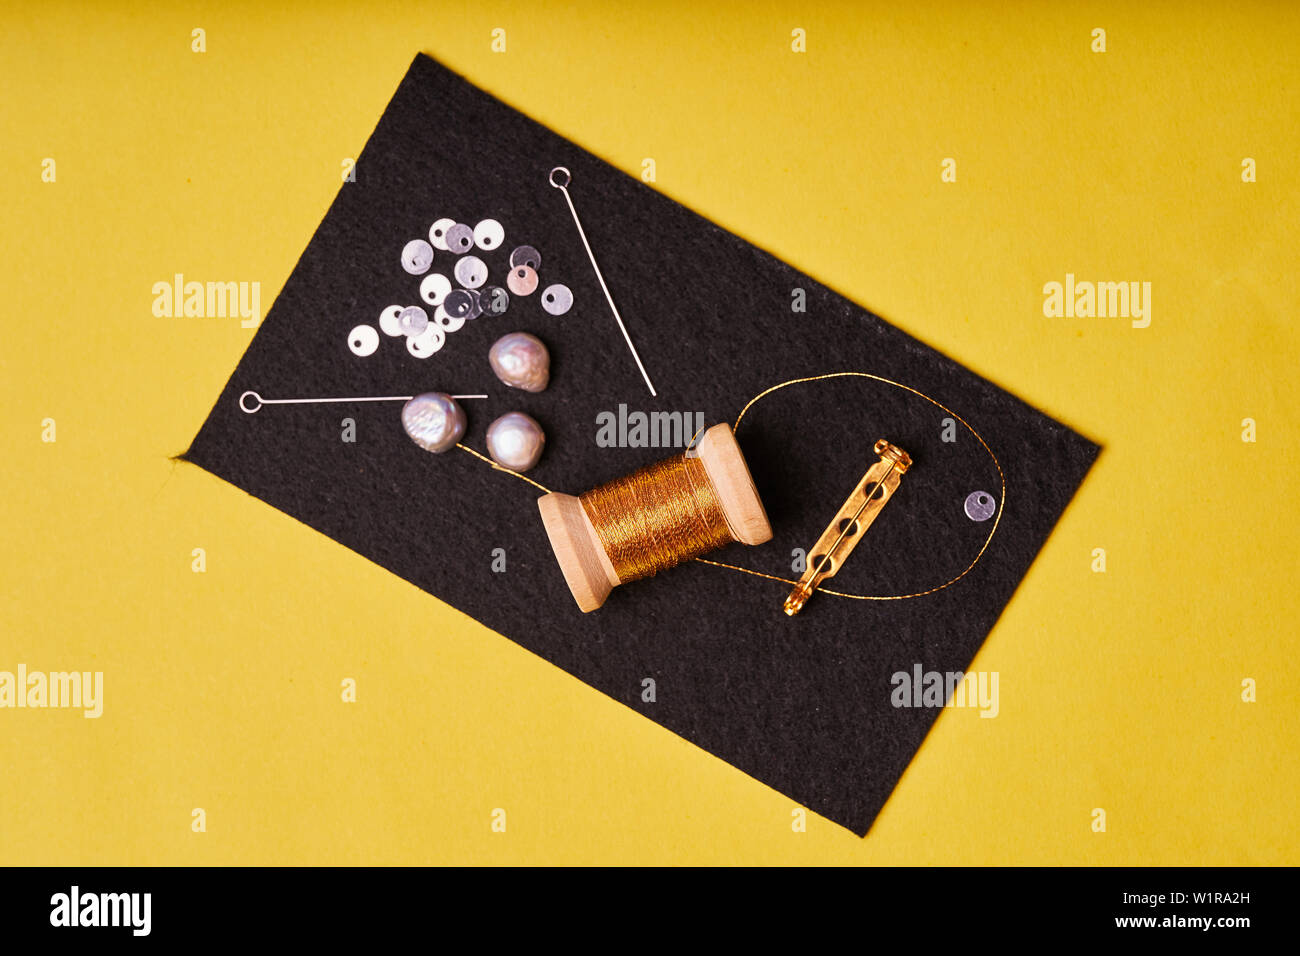 Embroidery products and tools. Coil metal threads, pearls and a pin with the needle on the black felt. Stock Photo